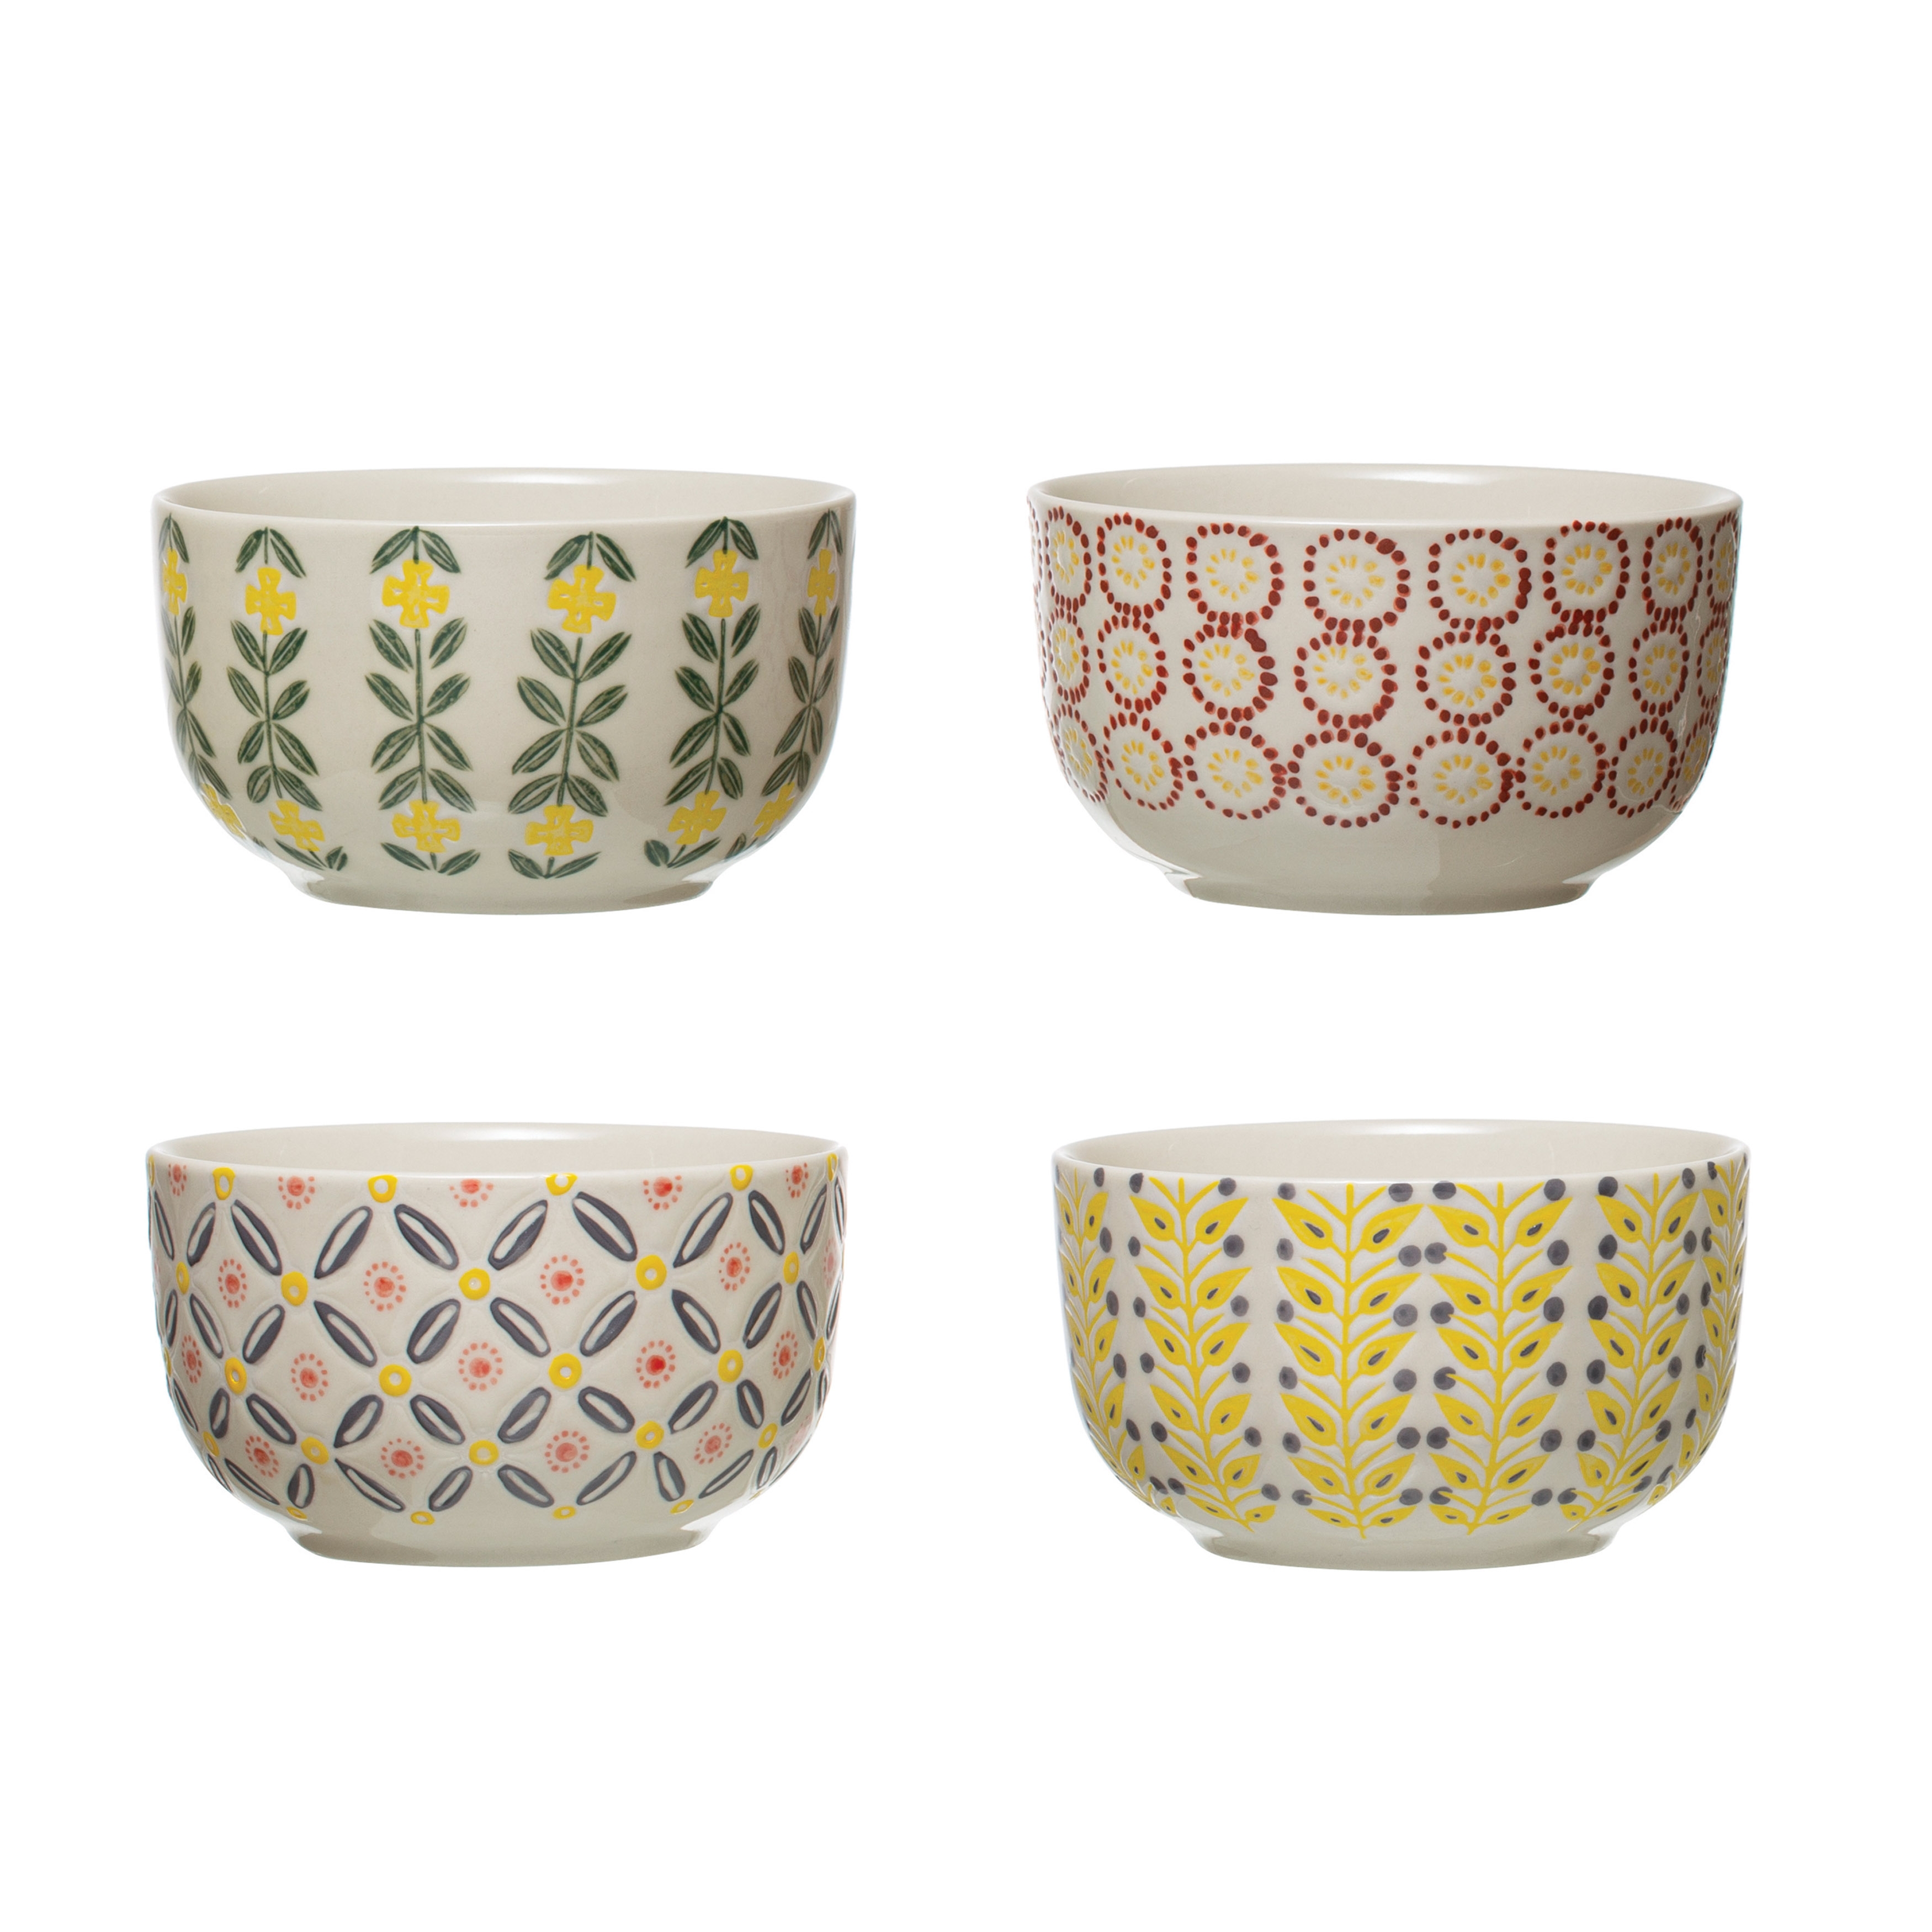 Hand-Stamped Stoneware Bowls with Floral Patterns, Set of 4 Styles - Image 0